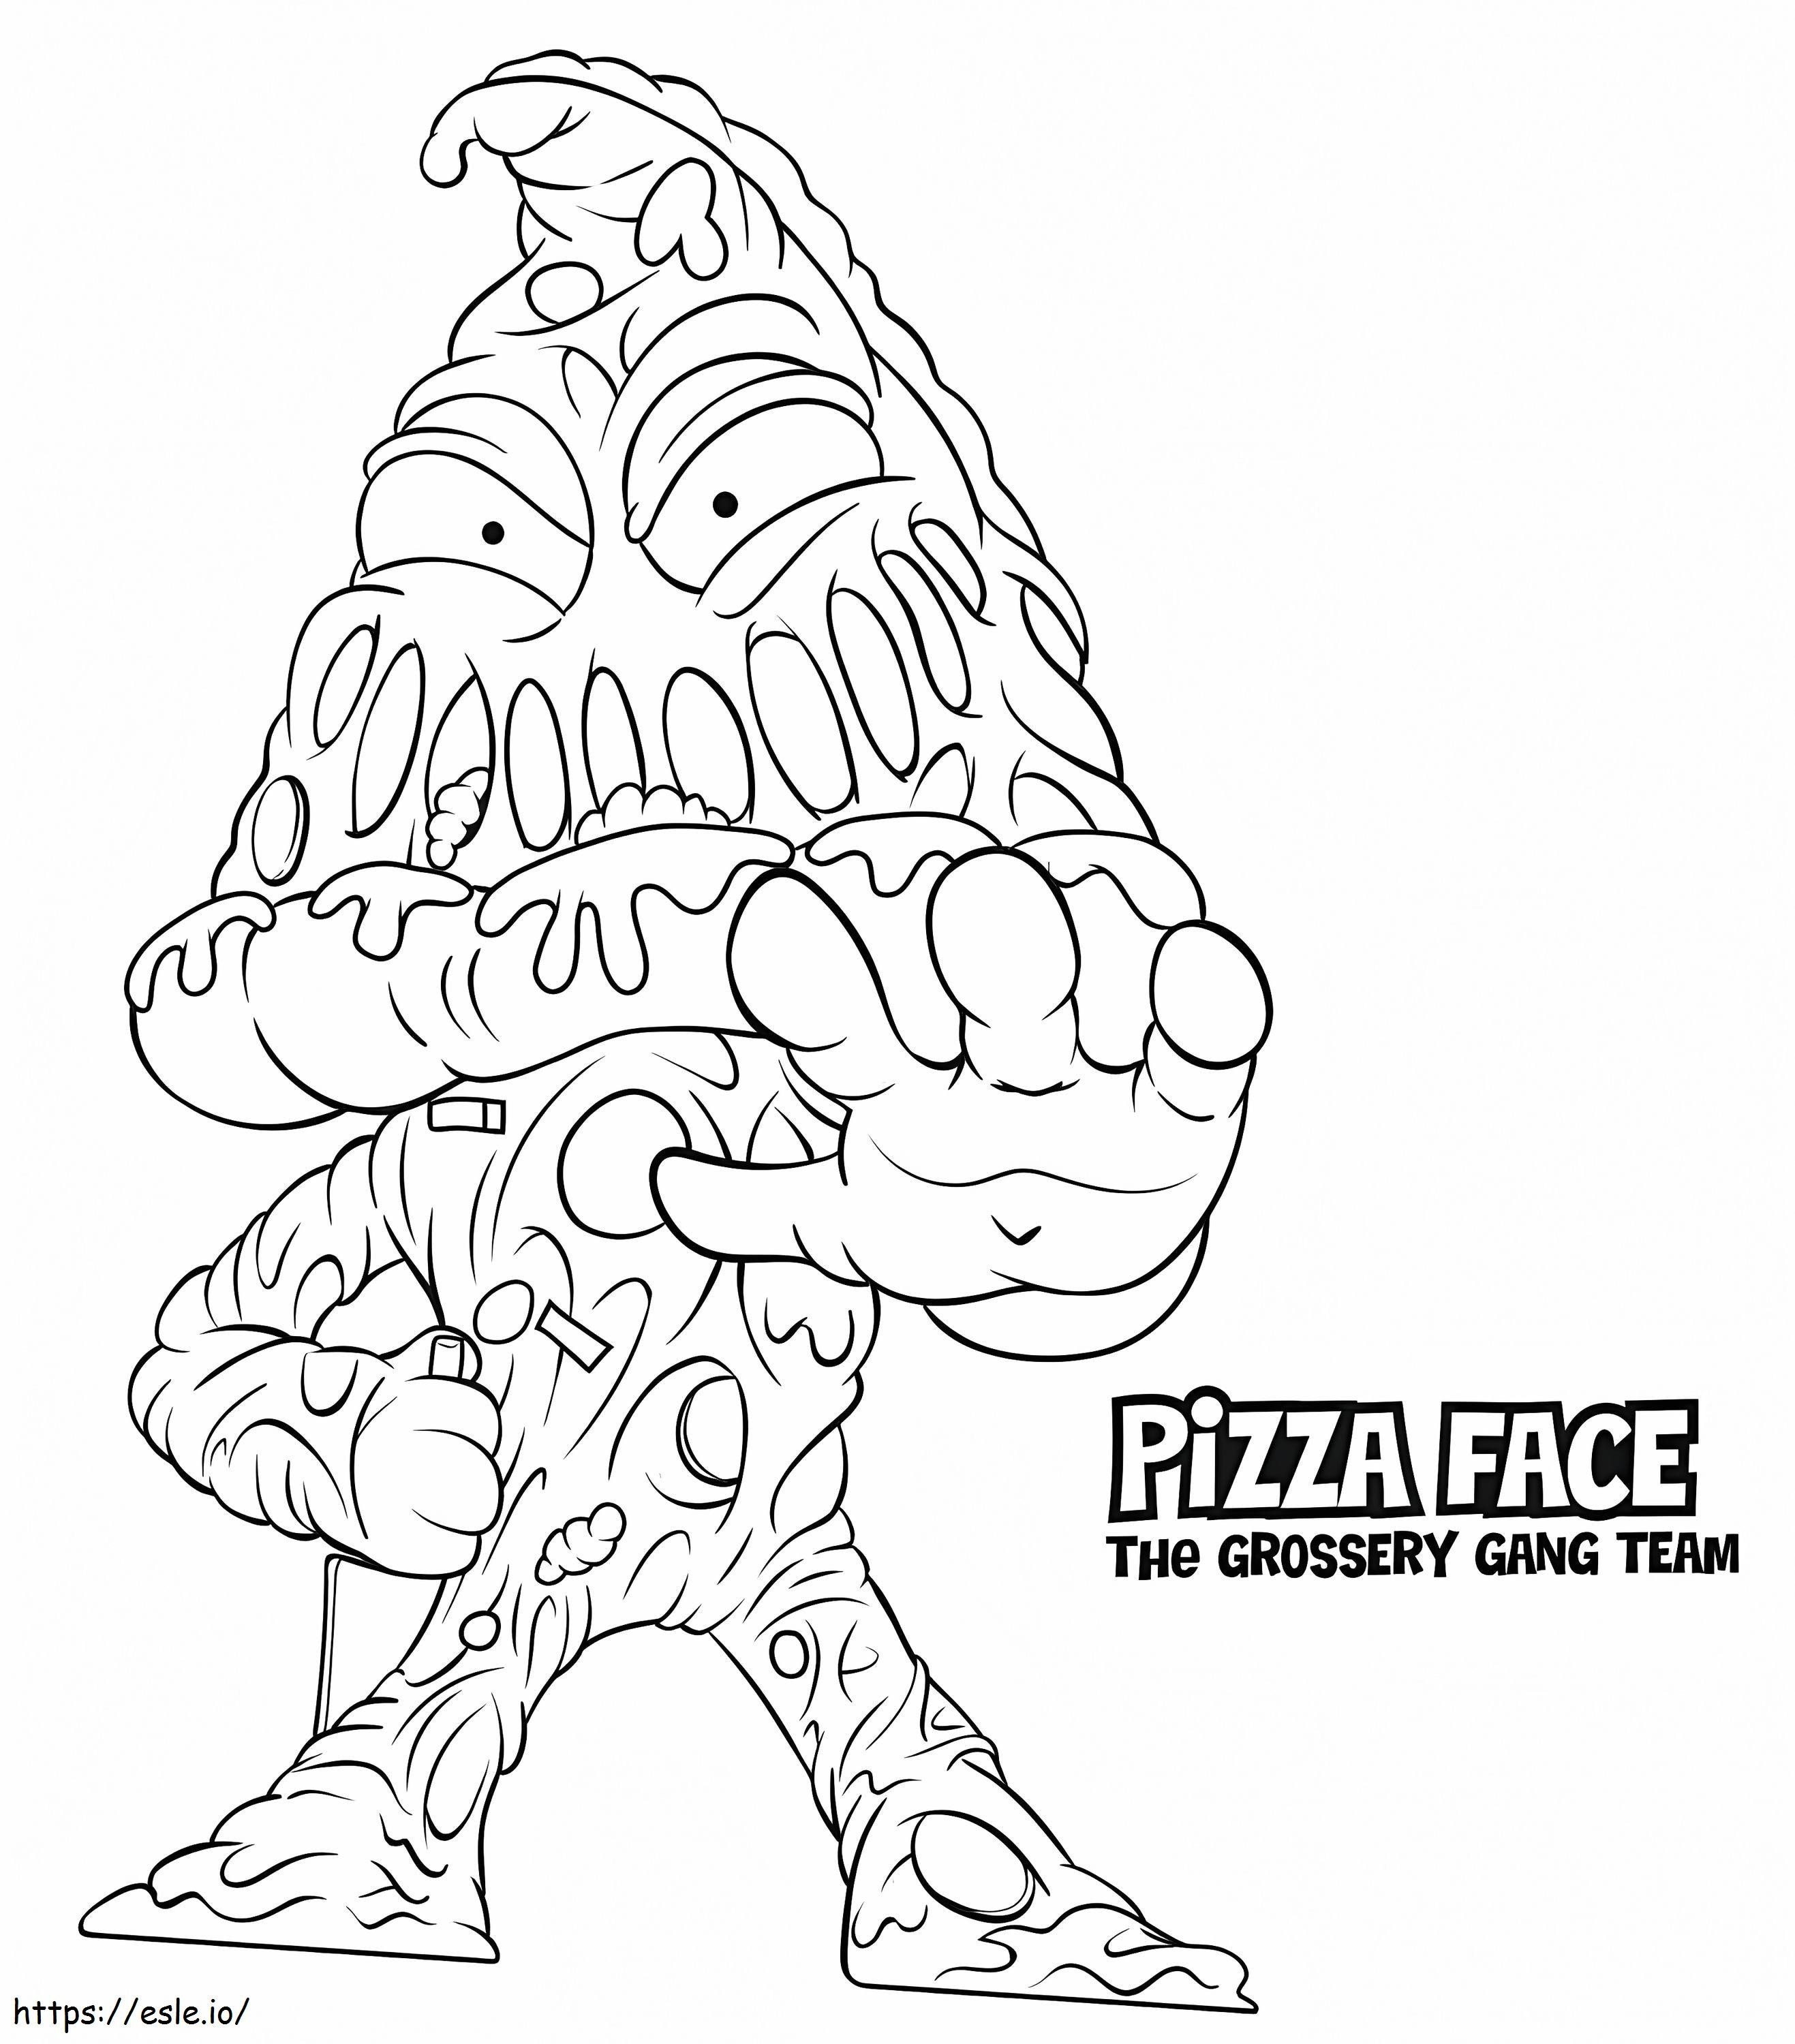 Pizza Face Grossery Gang coloring page